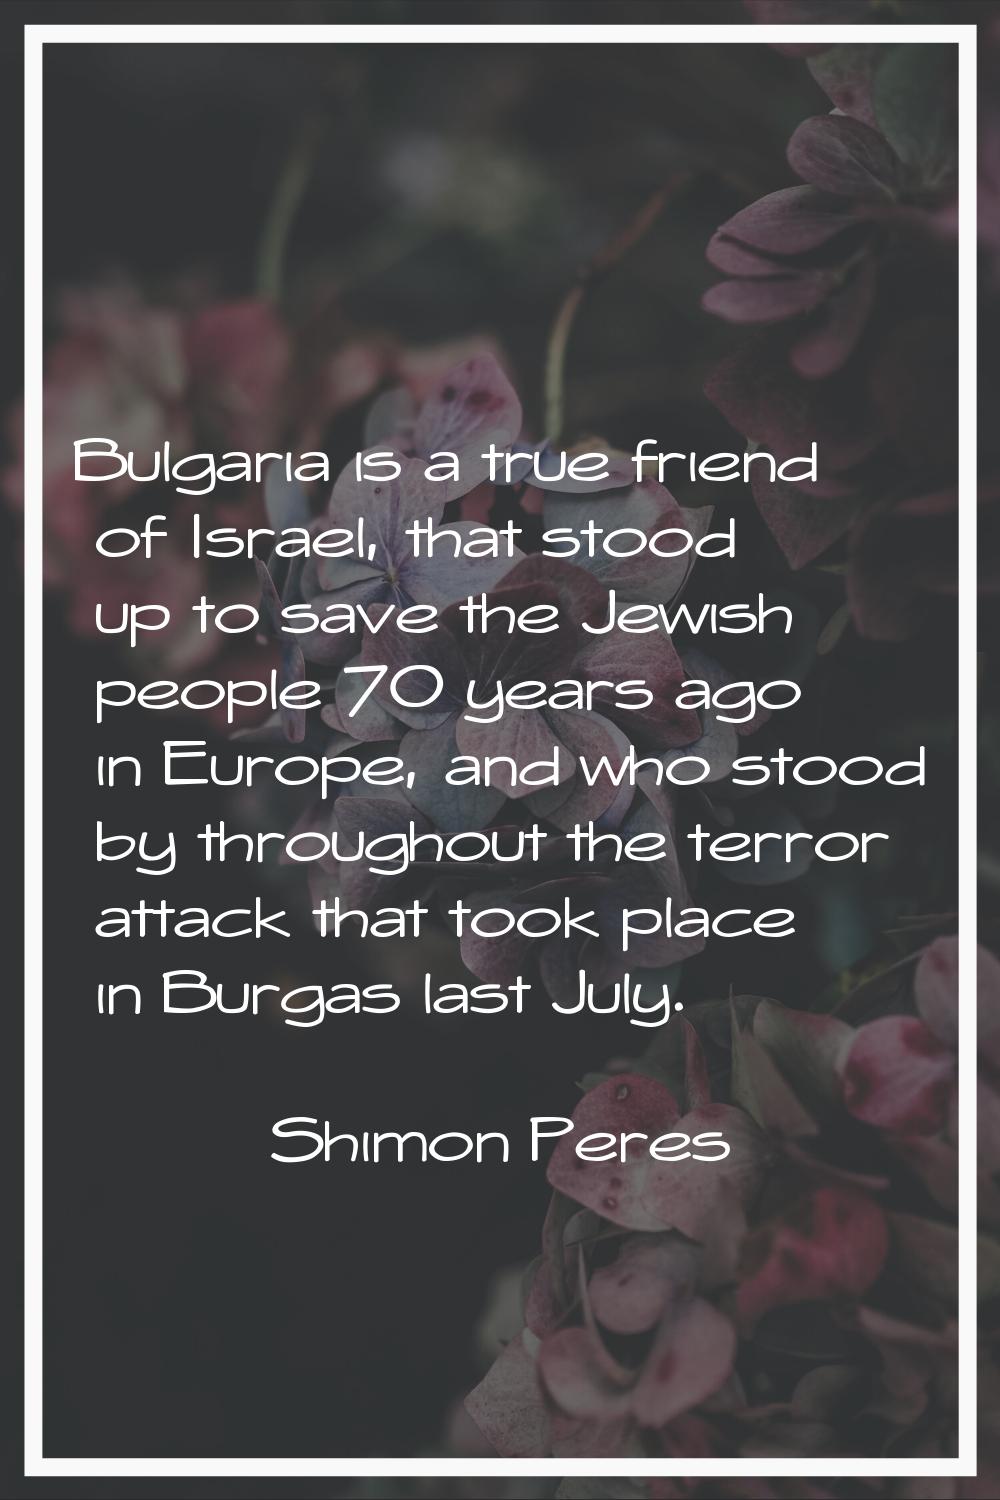 Bulgaria is a true friend of Israel, that stood up to save the Jewish people 70 years ago in Europe